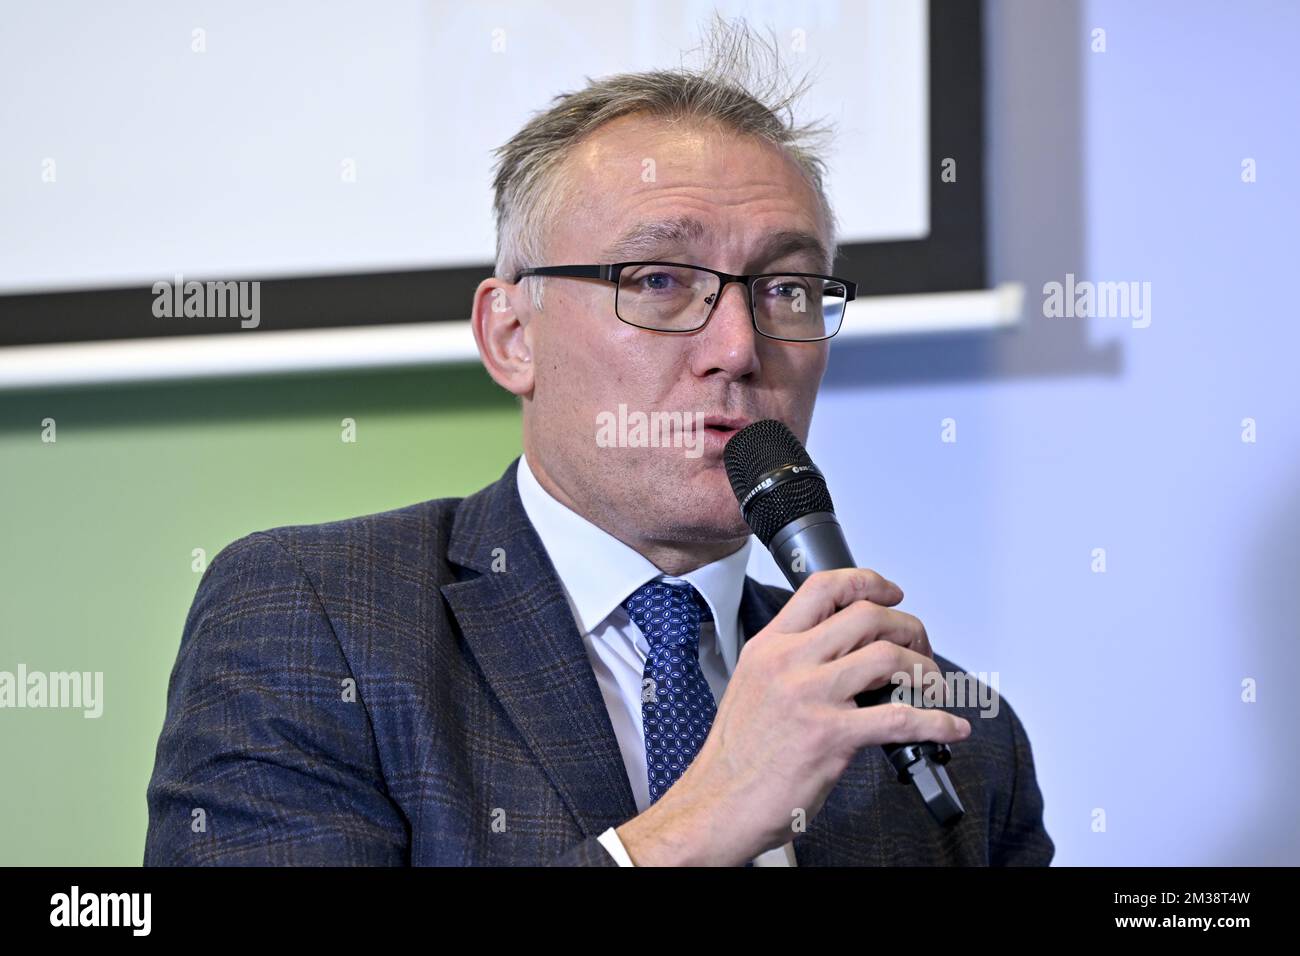 Kamil Novak, FIBA Executive Director Europe pictured during a press conference on the world championship basket 3x3 in Antwerp from 21 to 26 June 2022, Tuesday 08 March 2022, in Berchem. BELGA PHOTO DIRK WAEM Stock Photo